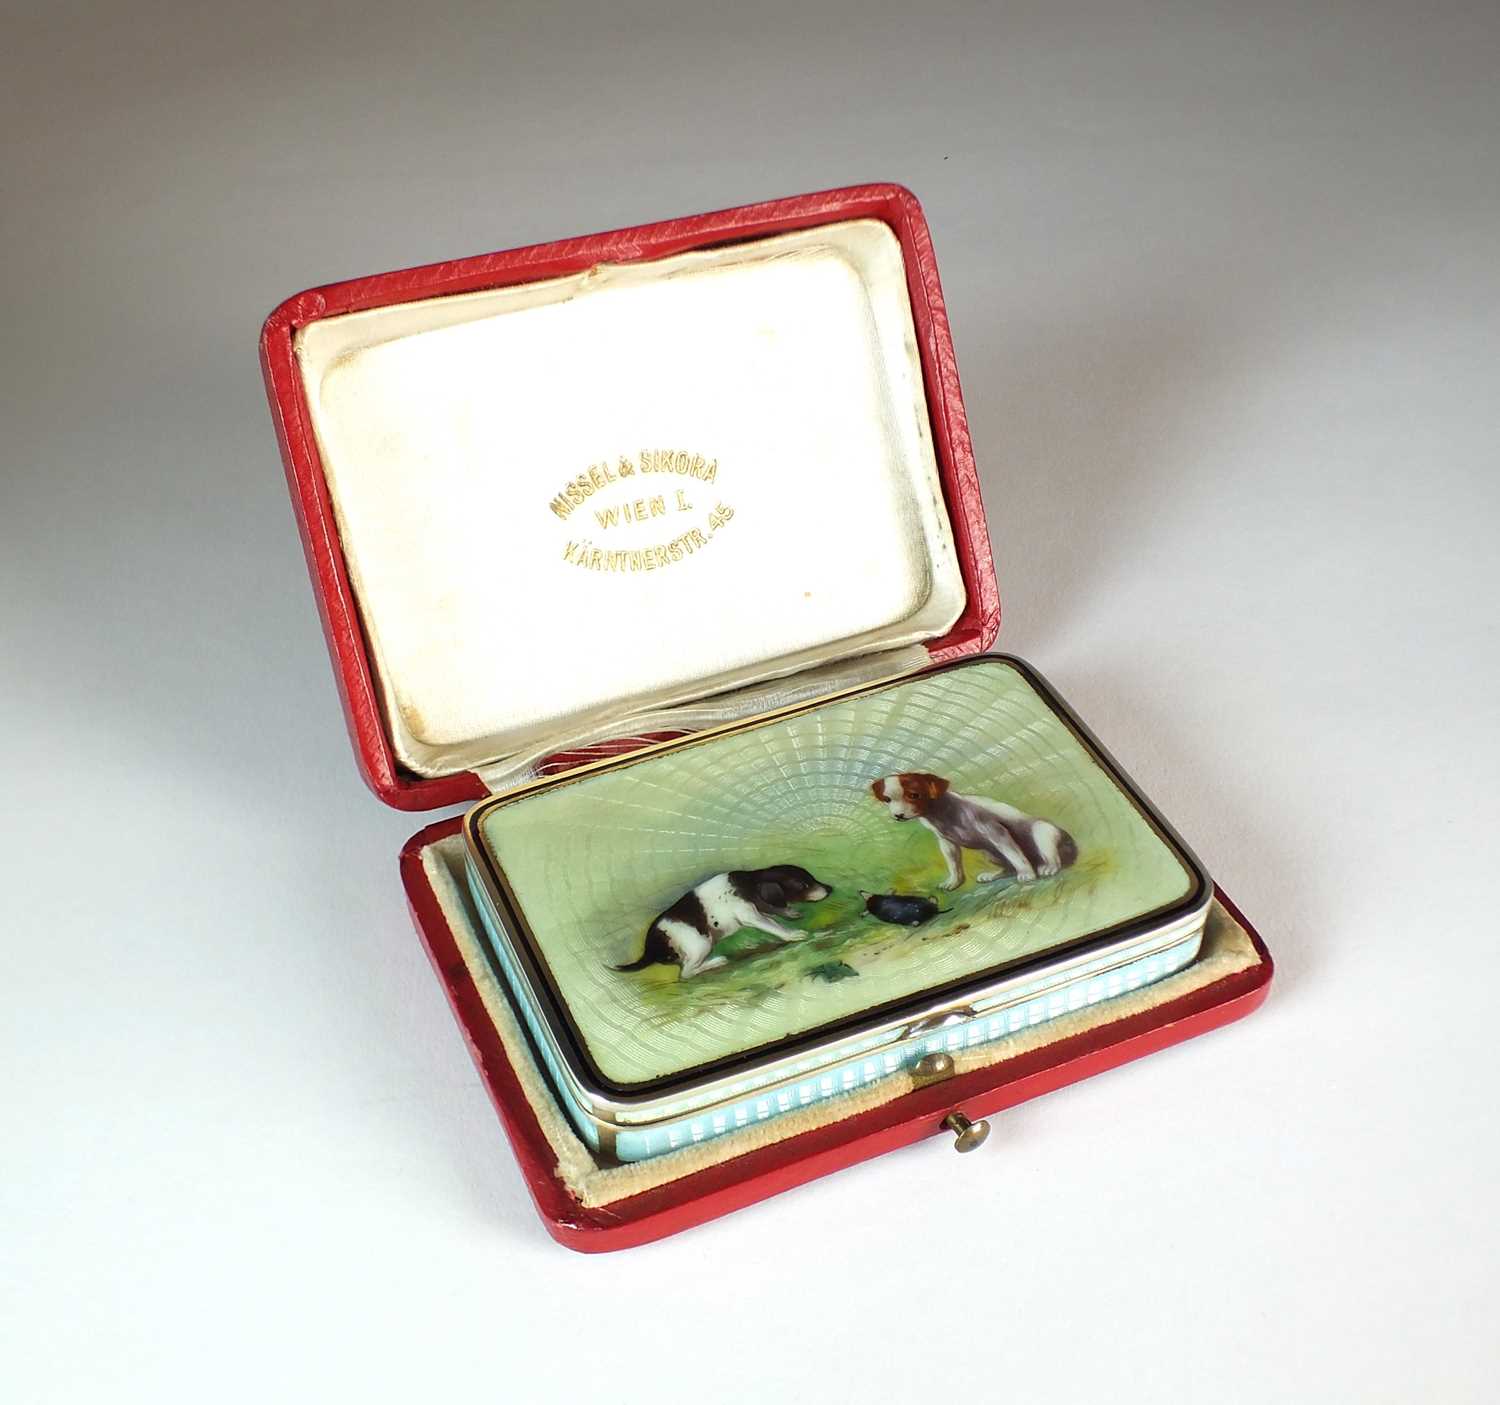 A late 19th/early 20th century Austro-Hungarian silver-gilt and enamel box